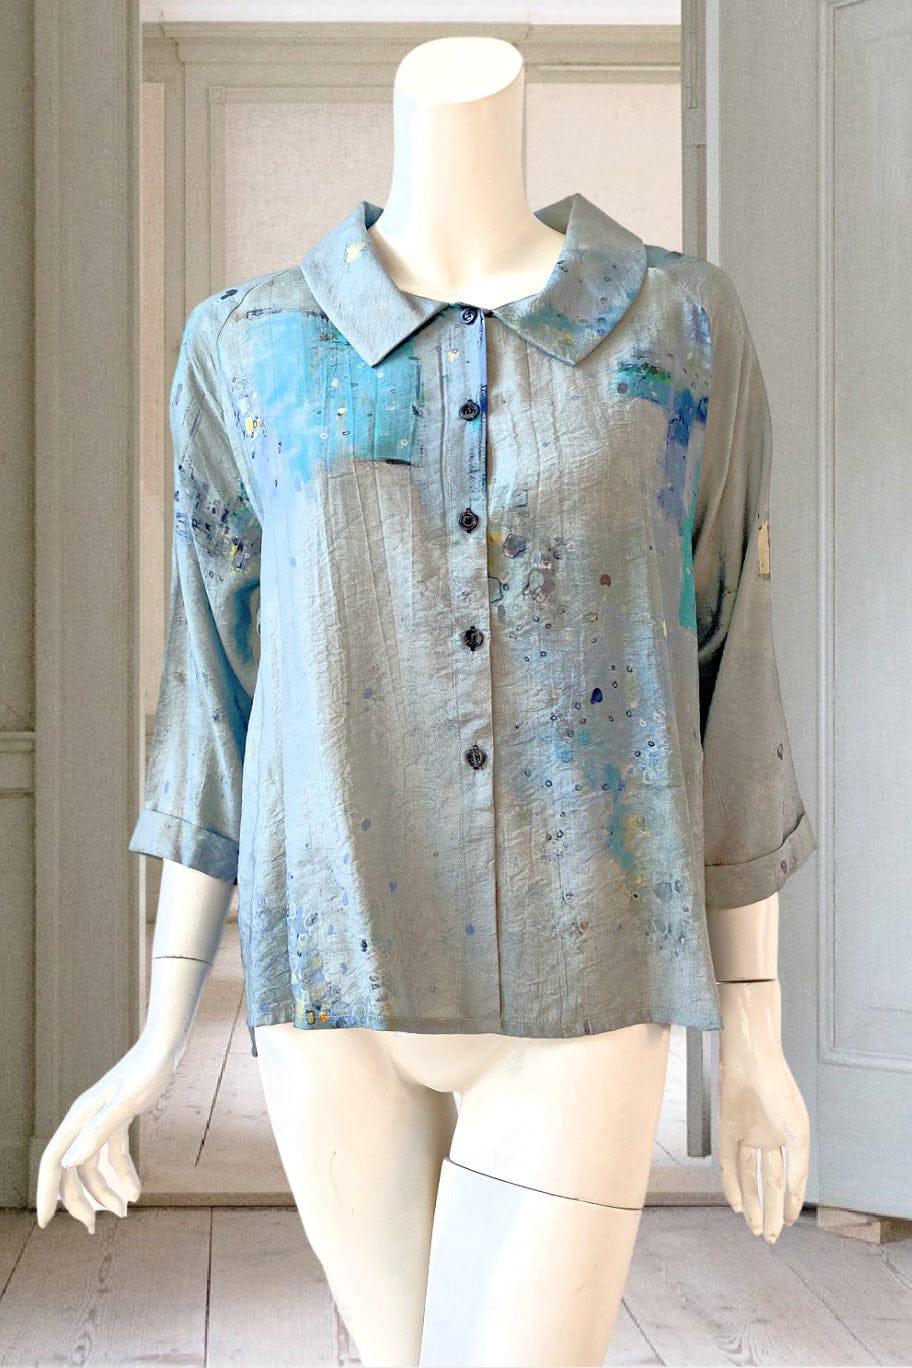 Pretty women's crop button down with 3/4 length sleeves. Blue tones with an artistic scatter print. The blouse is worn by a manequin..